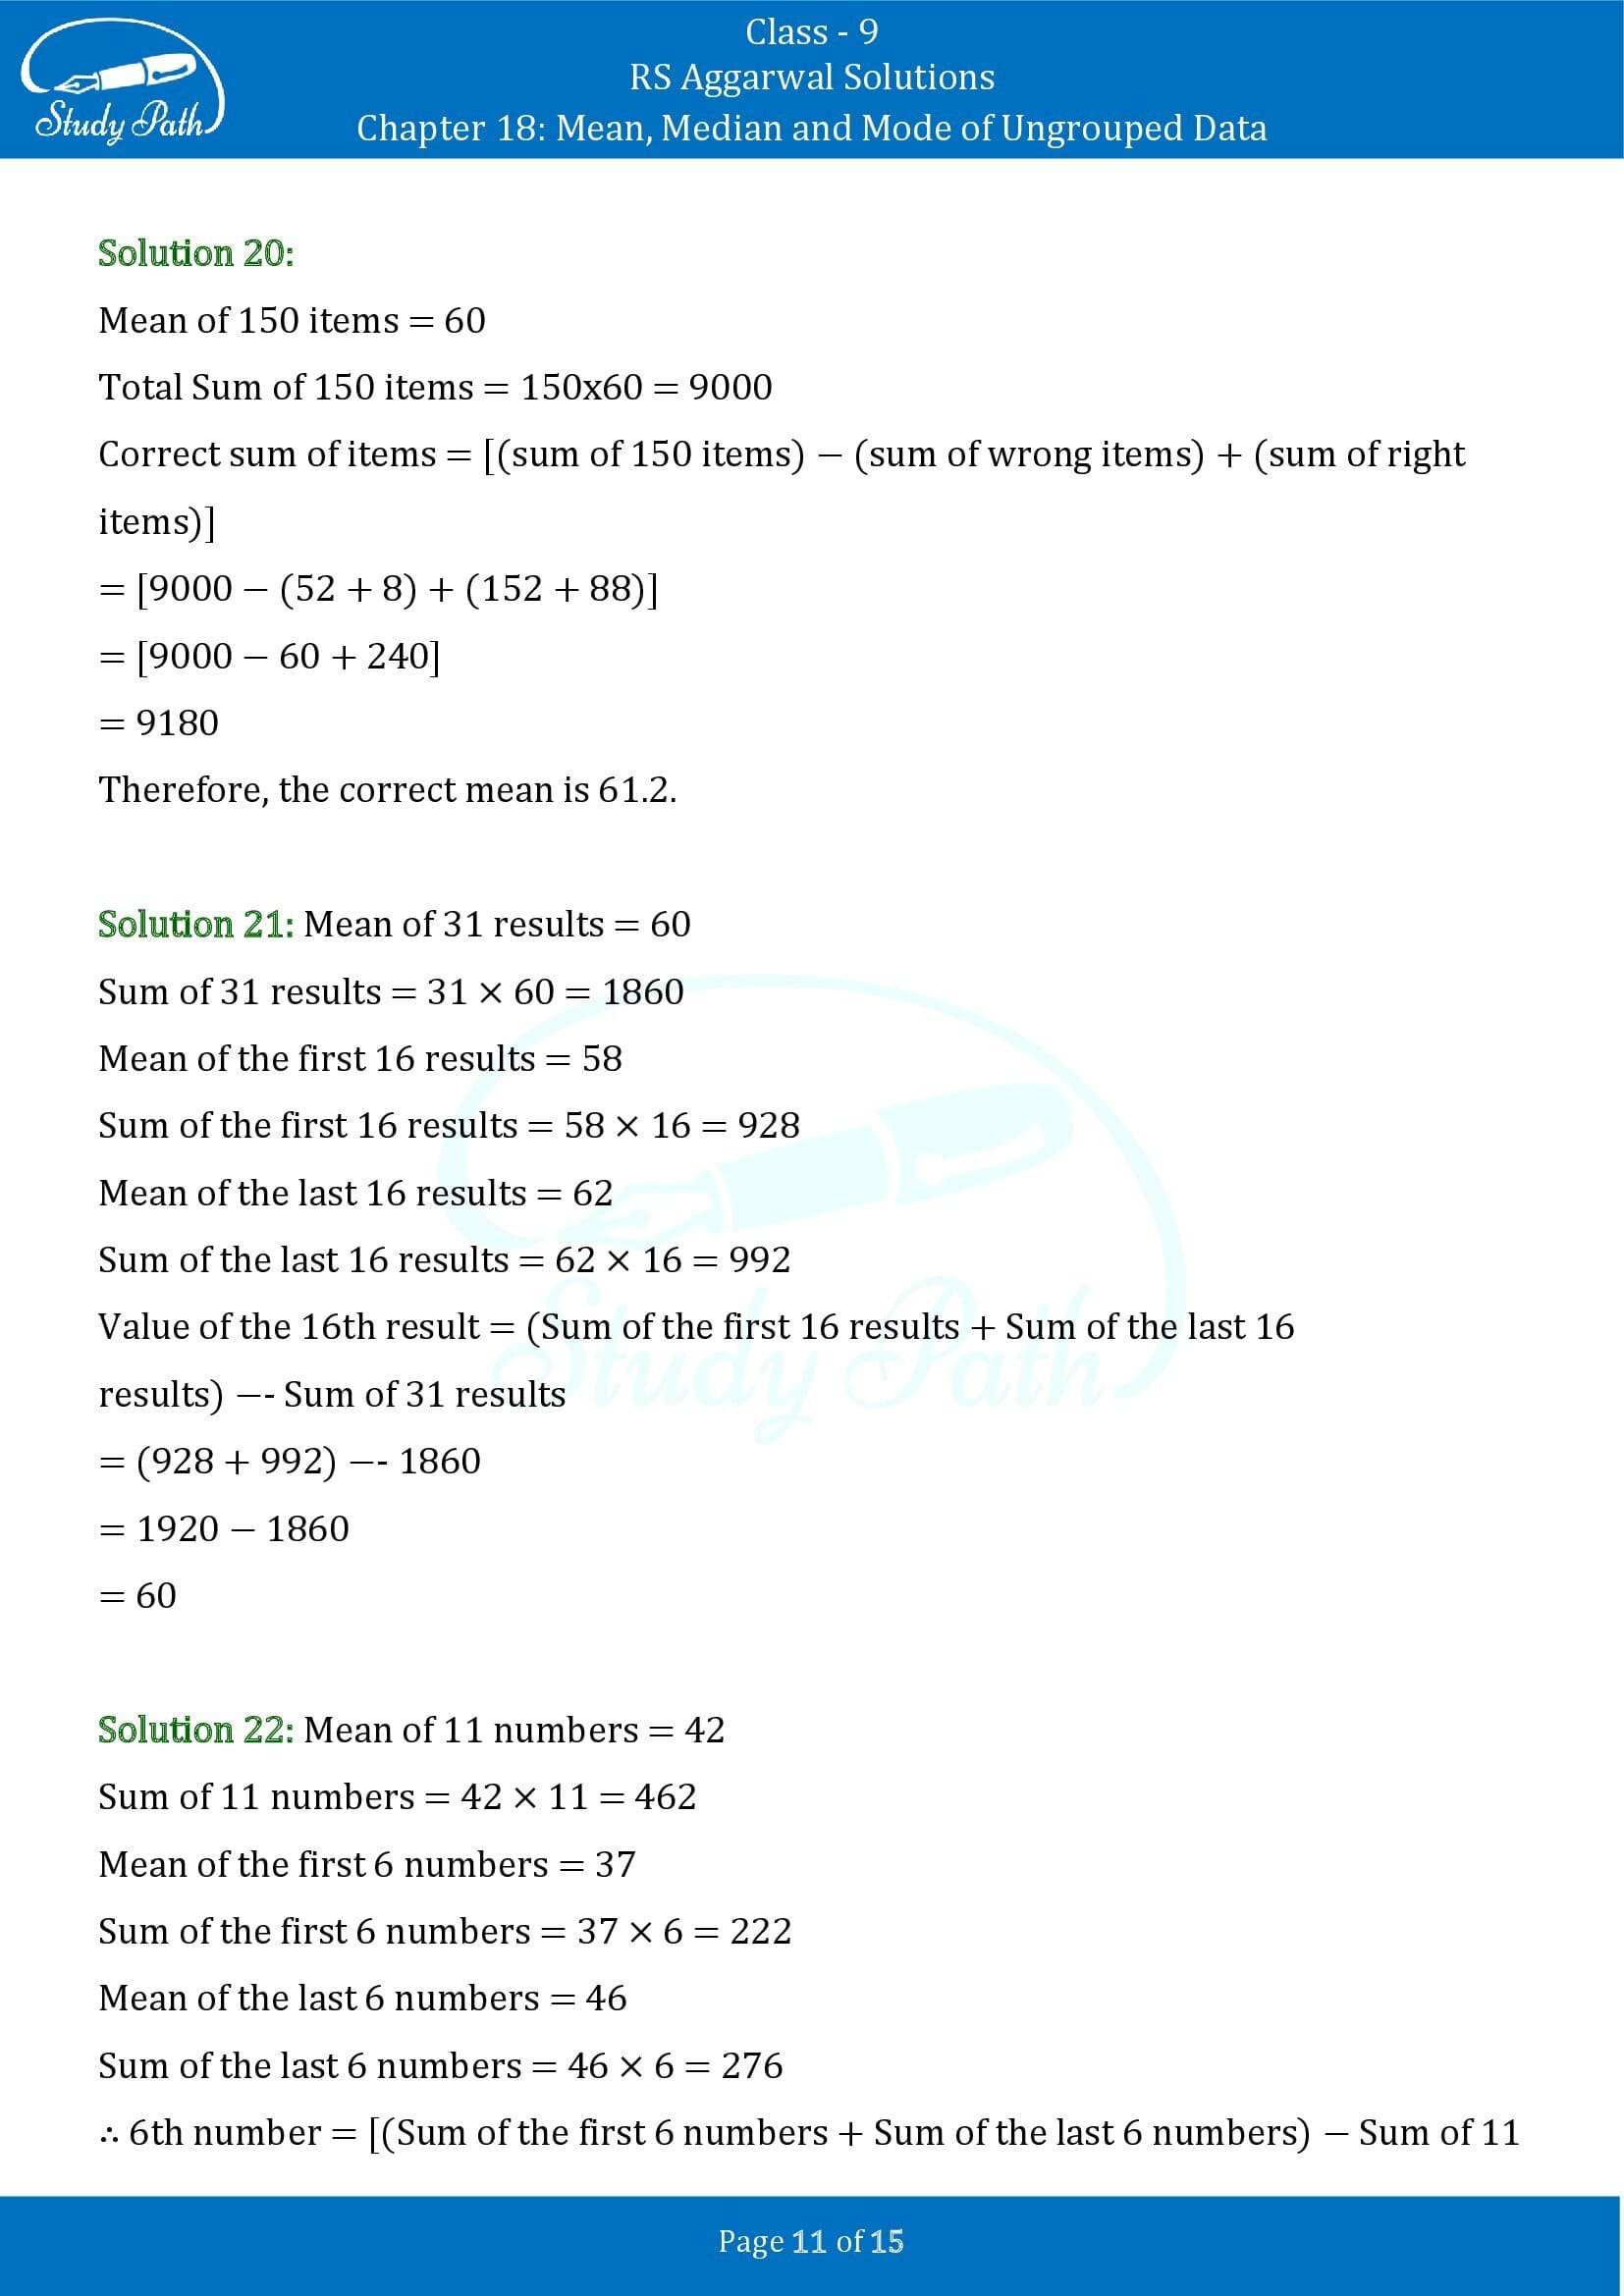 RS Aggarwal Solutions Class 9 Chapter 18 Mean Median and Mode of Ungrouped Data Exercise 18A 00011